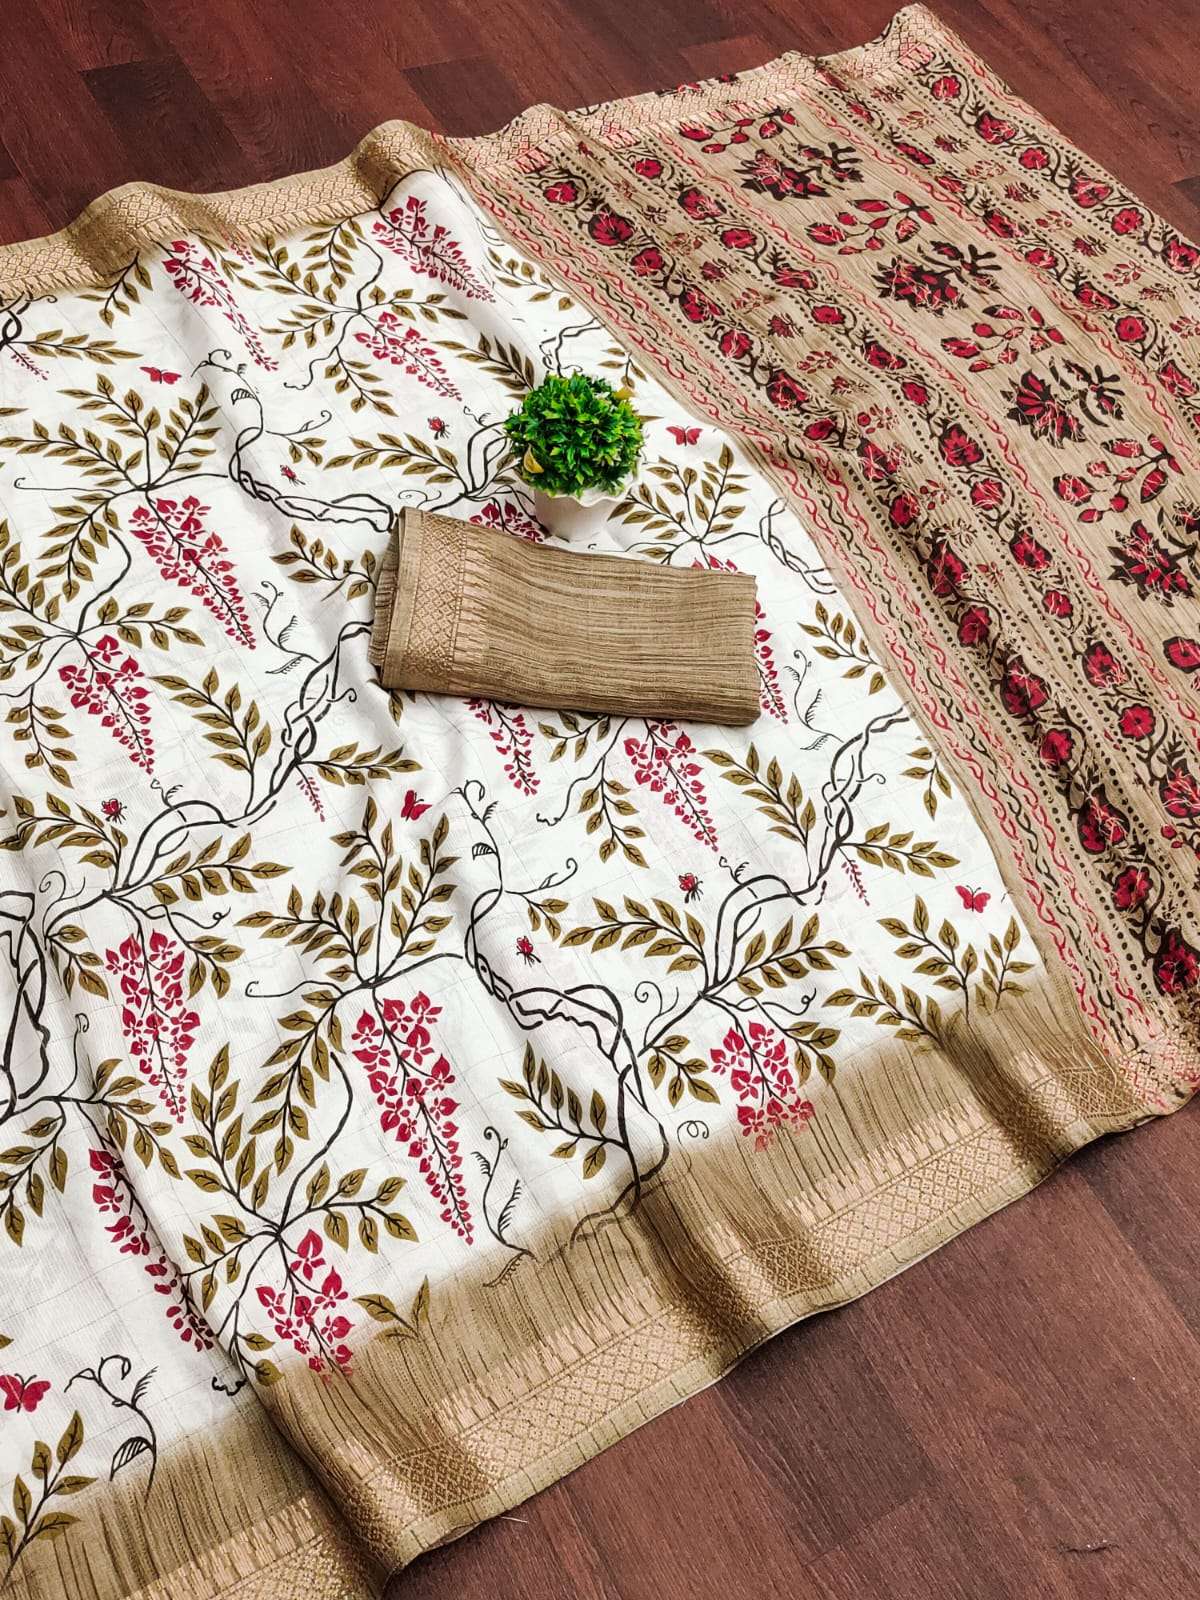 SUMMER SPECIAL COTTON WITH FLOWER PRINTED BEST SAREE WHOLESA...